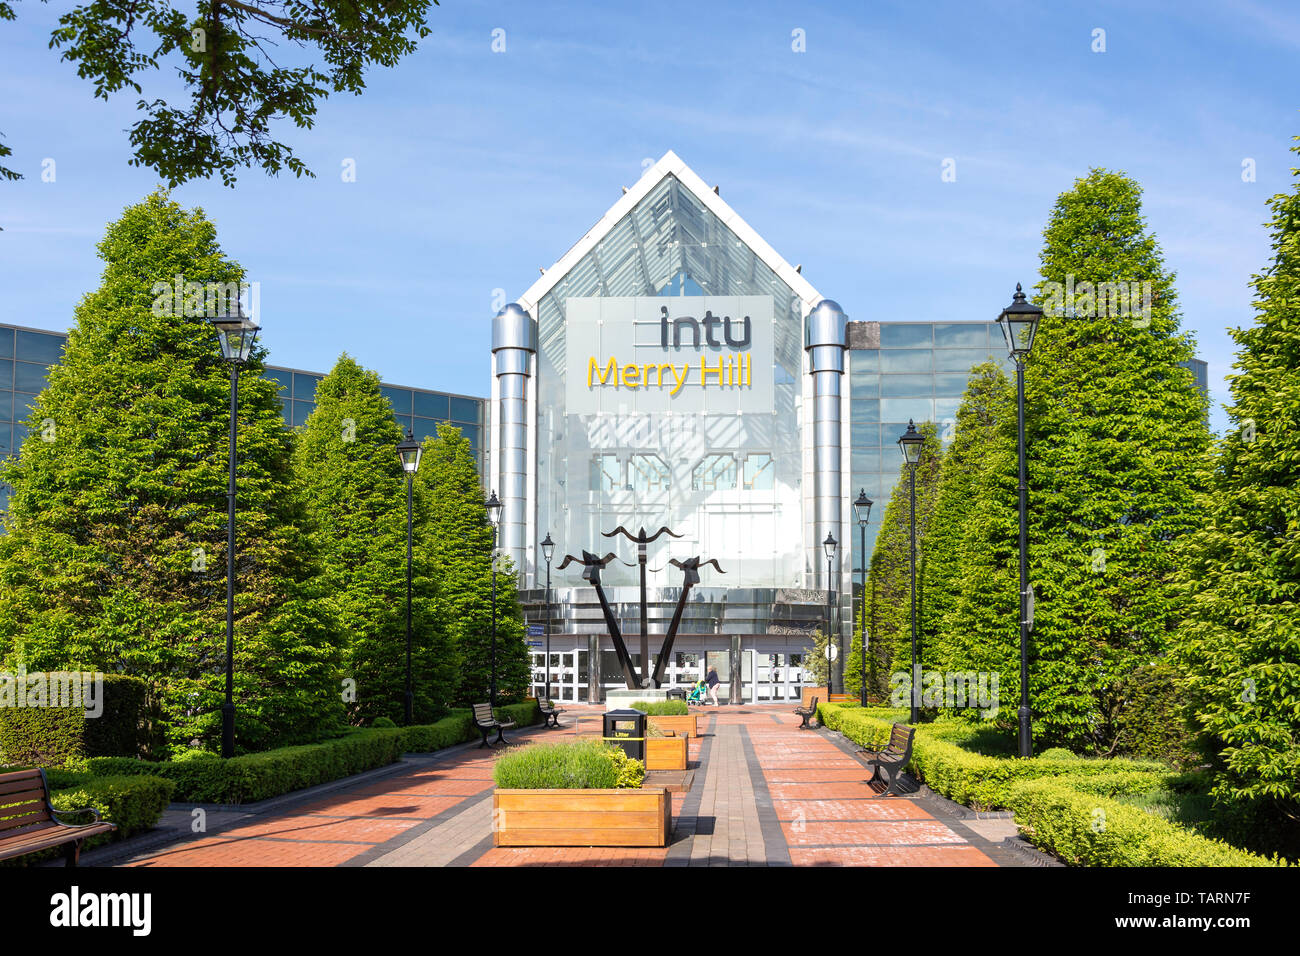 Entrance to Intu Merry Hill Shopping Centre, Brierley Hill, West Midlands, England, United Kingdom Stock Photo